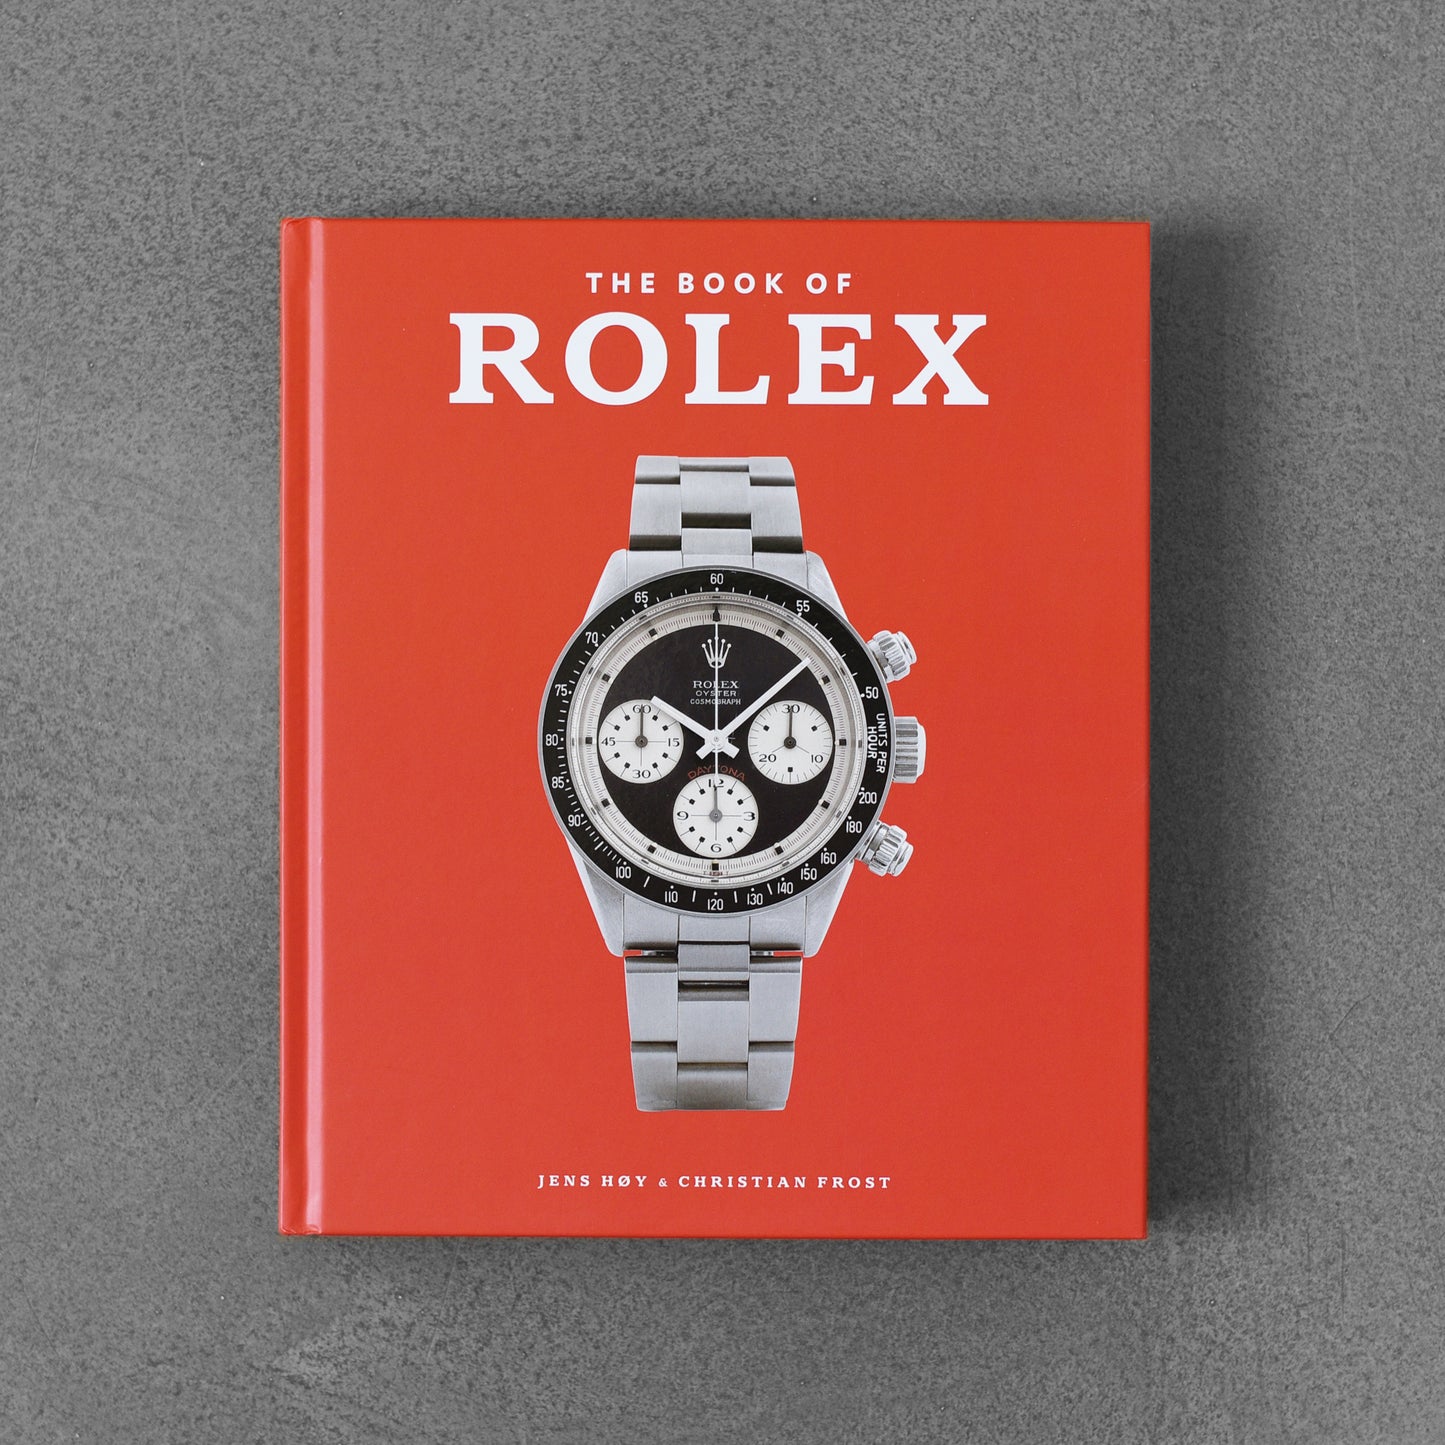 The Book of Rolex - Jens Høy & Christian Frost